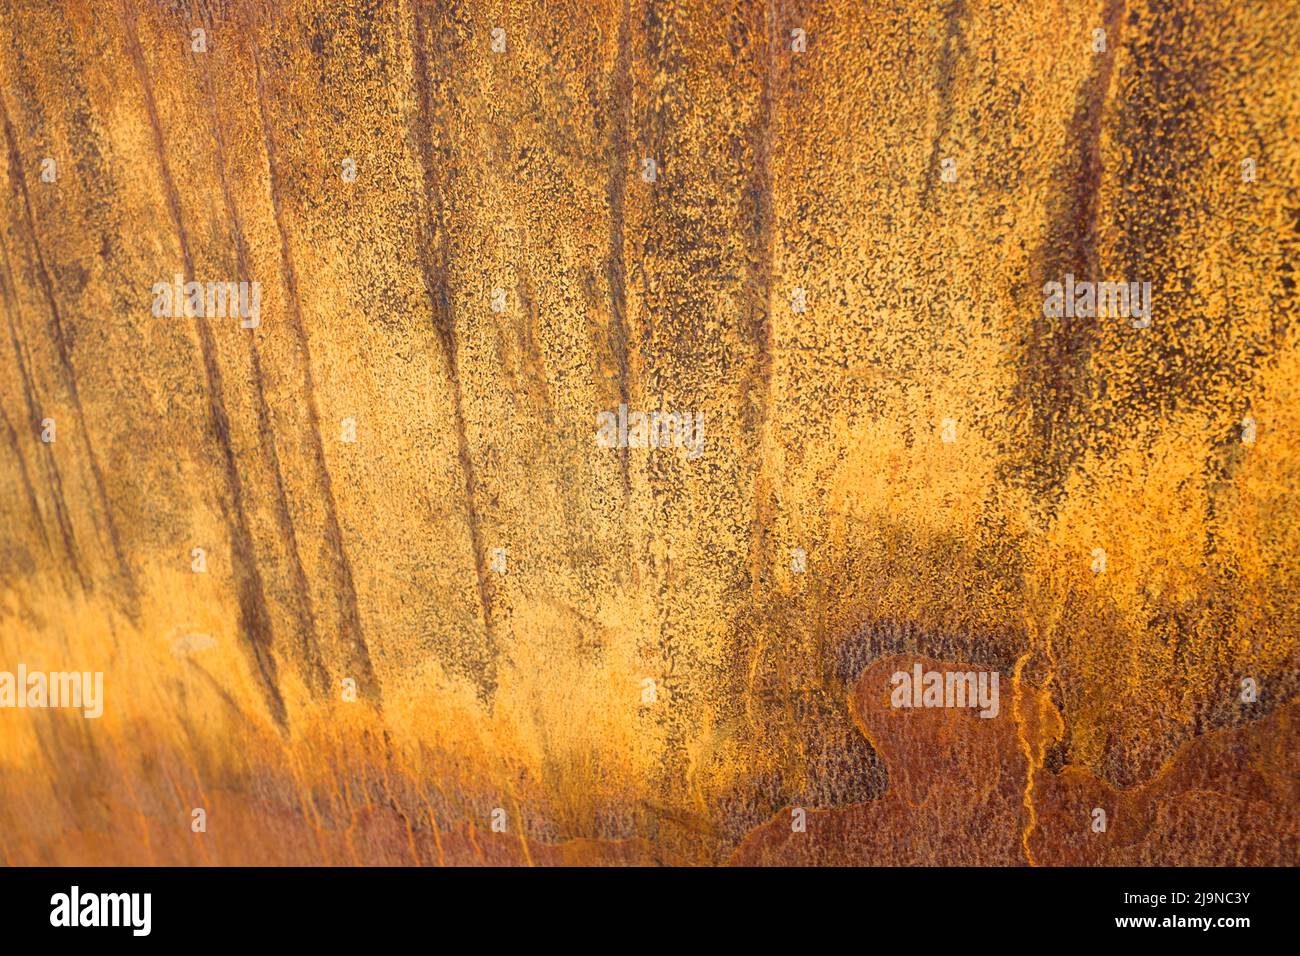 Russet colours of a rusty patterned texture on a metallic surface Stock Photo